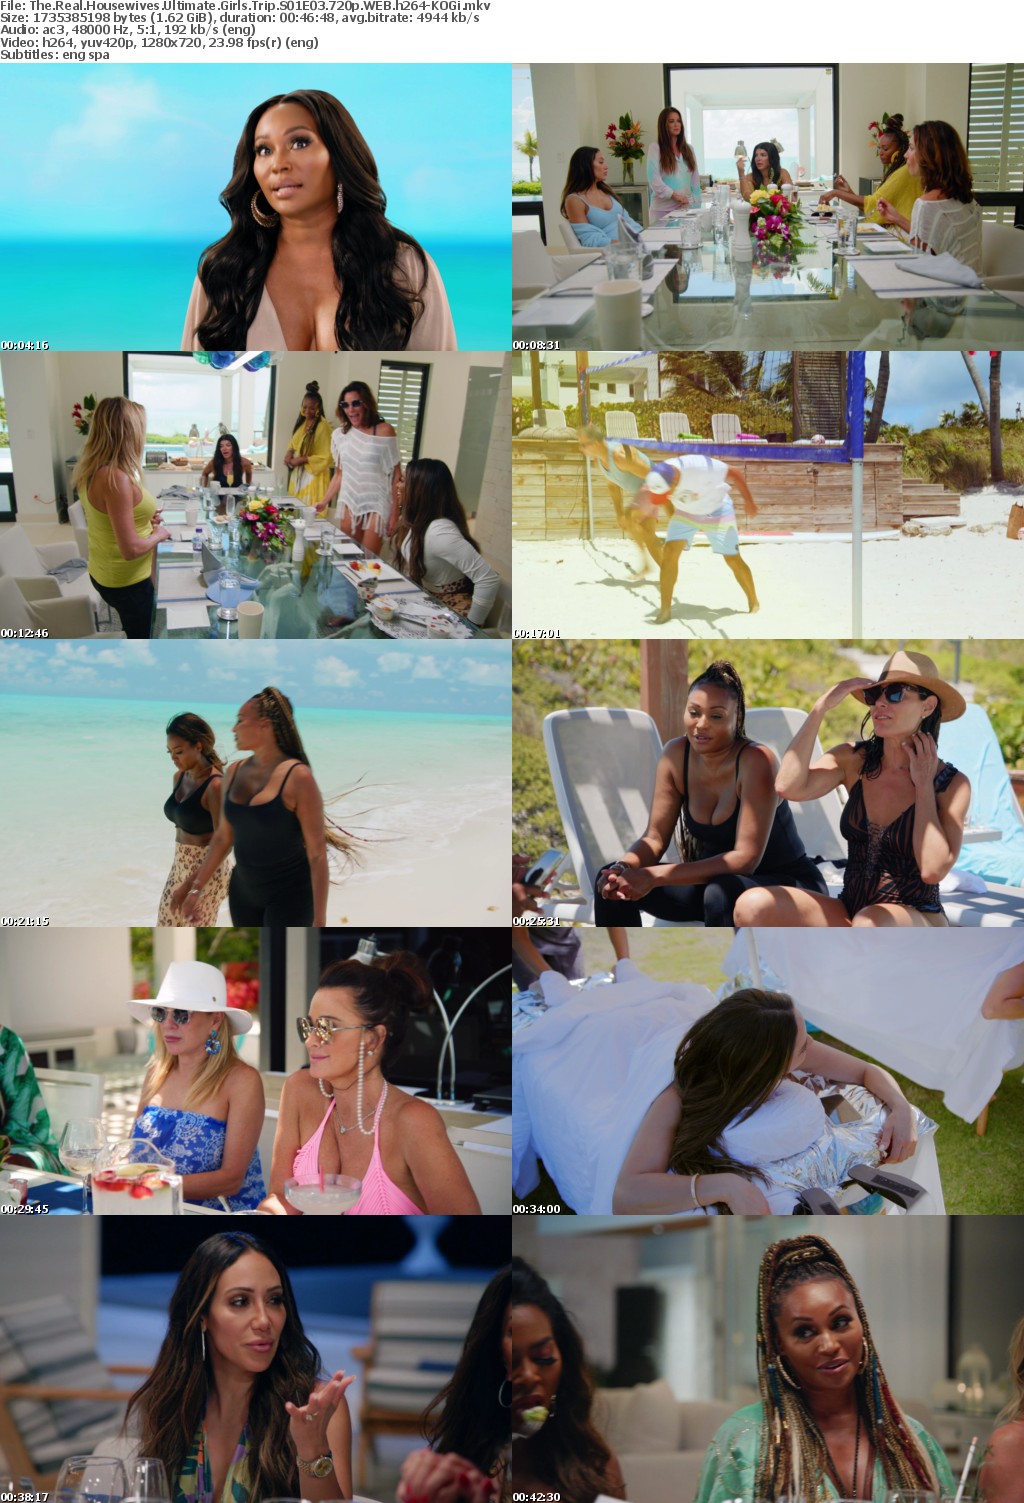 The Real Housewives Ultimate Girls Trip S01E03 720p WEB h264-KOGi